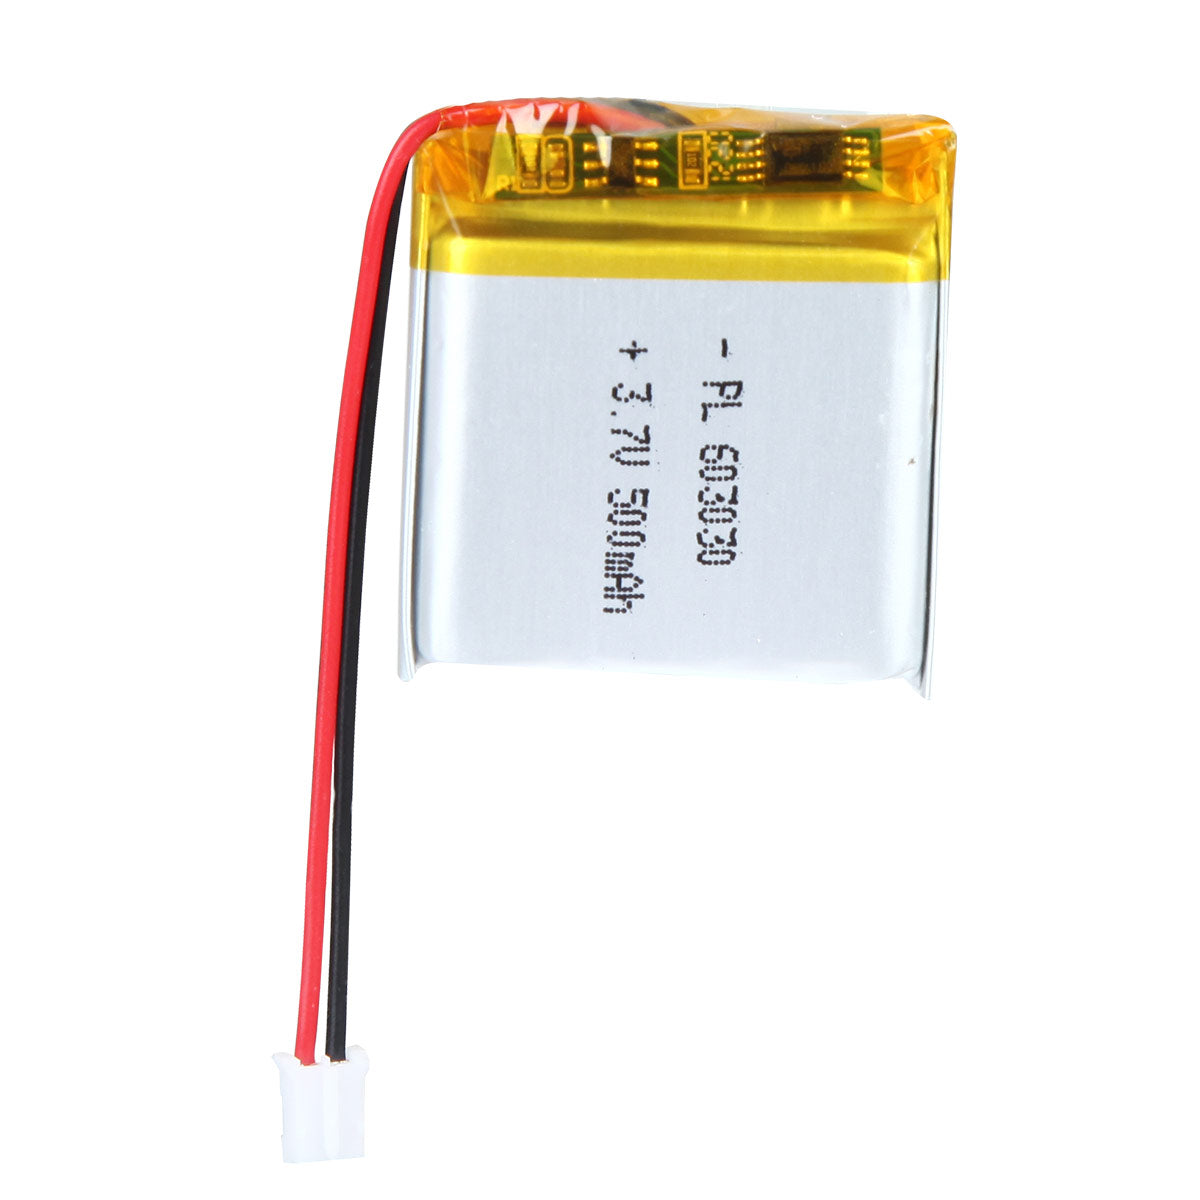 3.7V 500mAh 603030 Lipo Battery Rechargeable Lithium Polymer